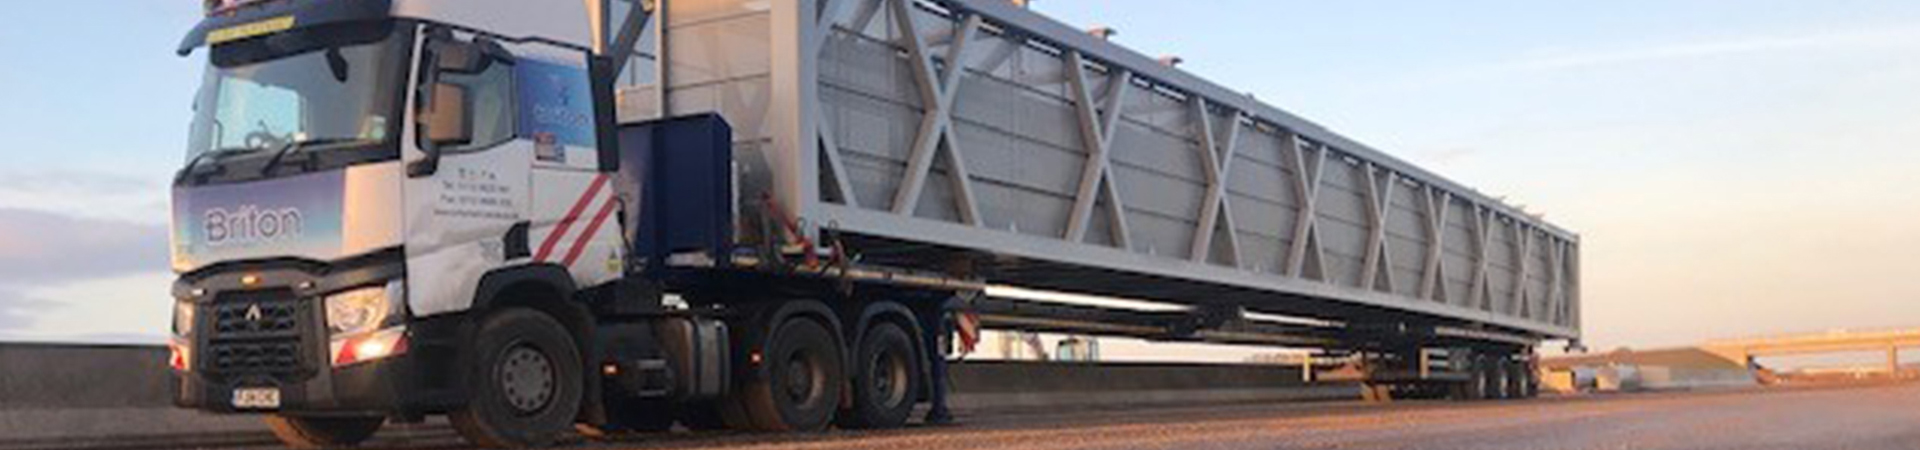 Lorry carrying structural steel